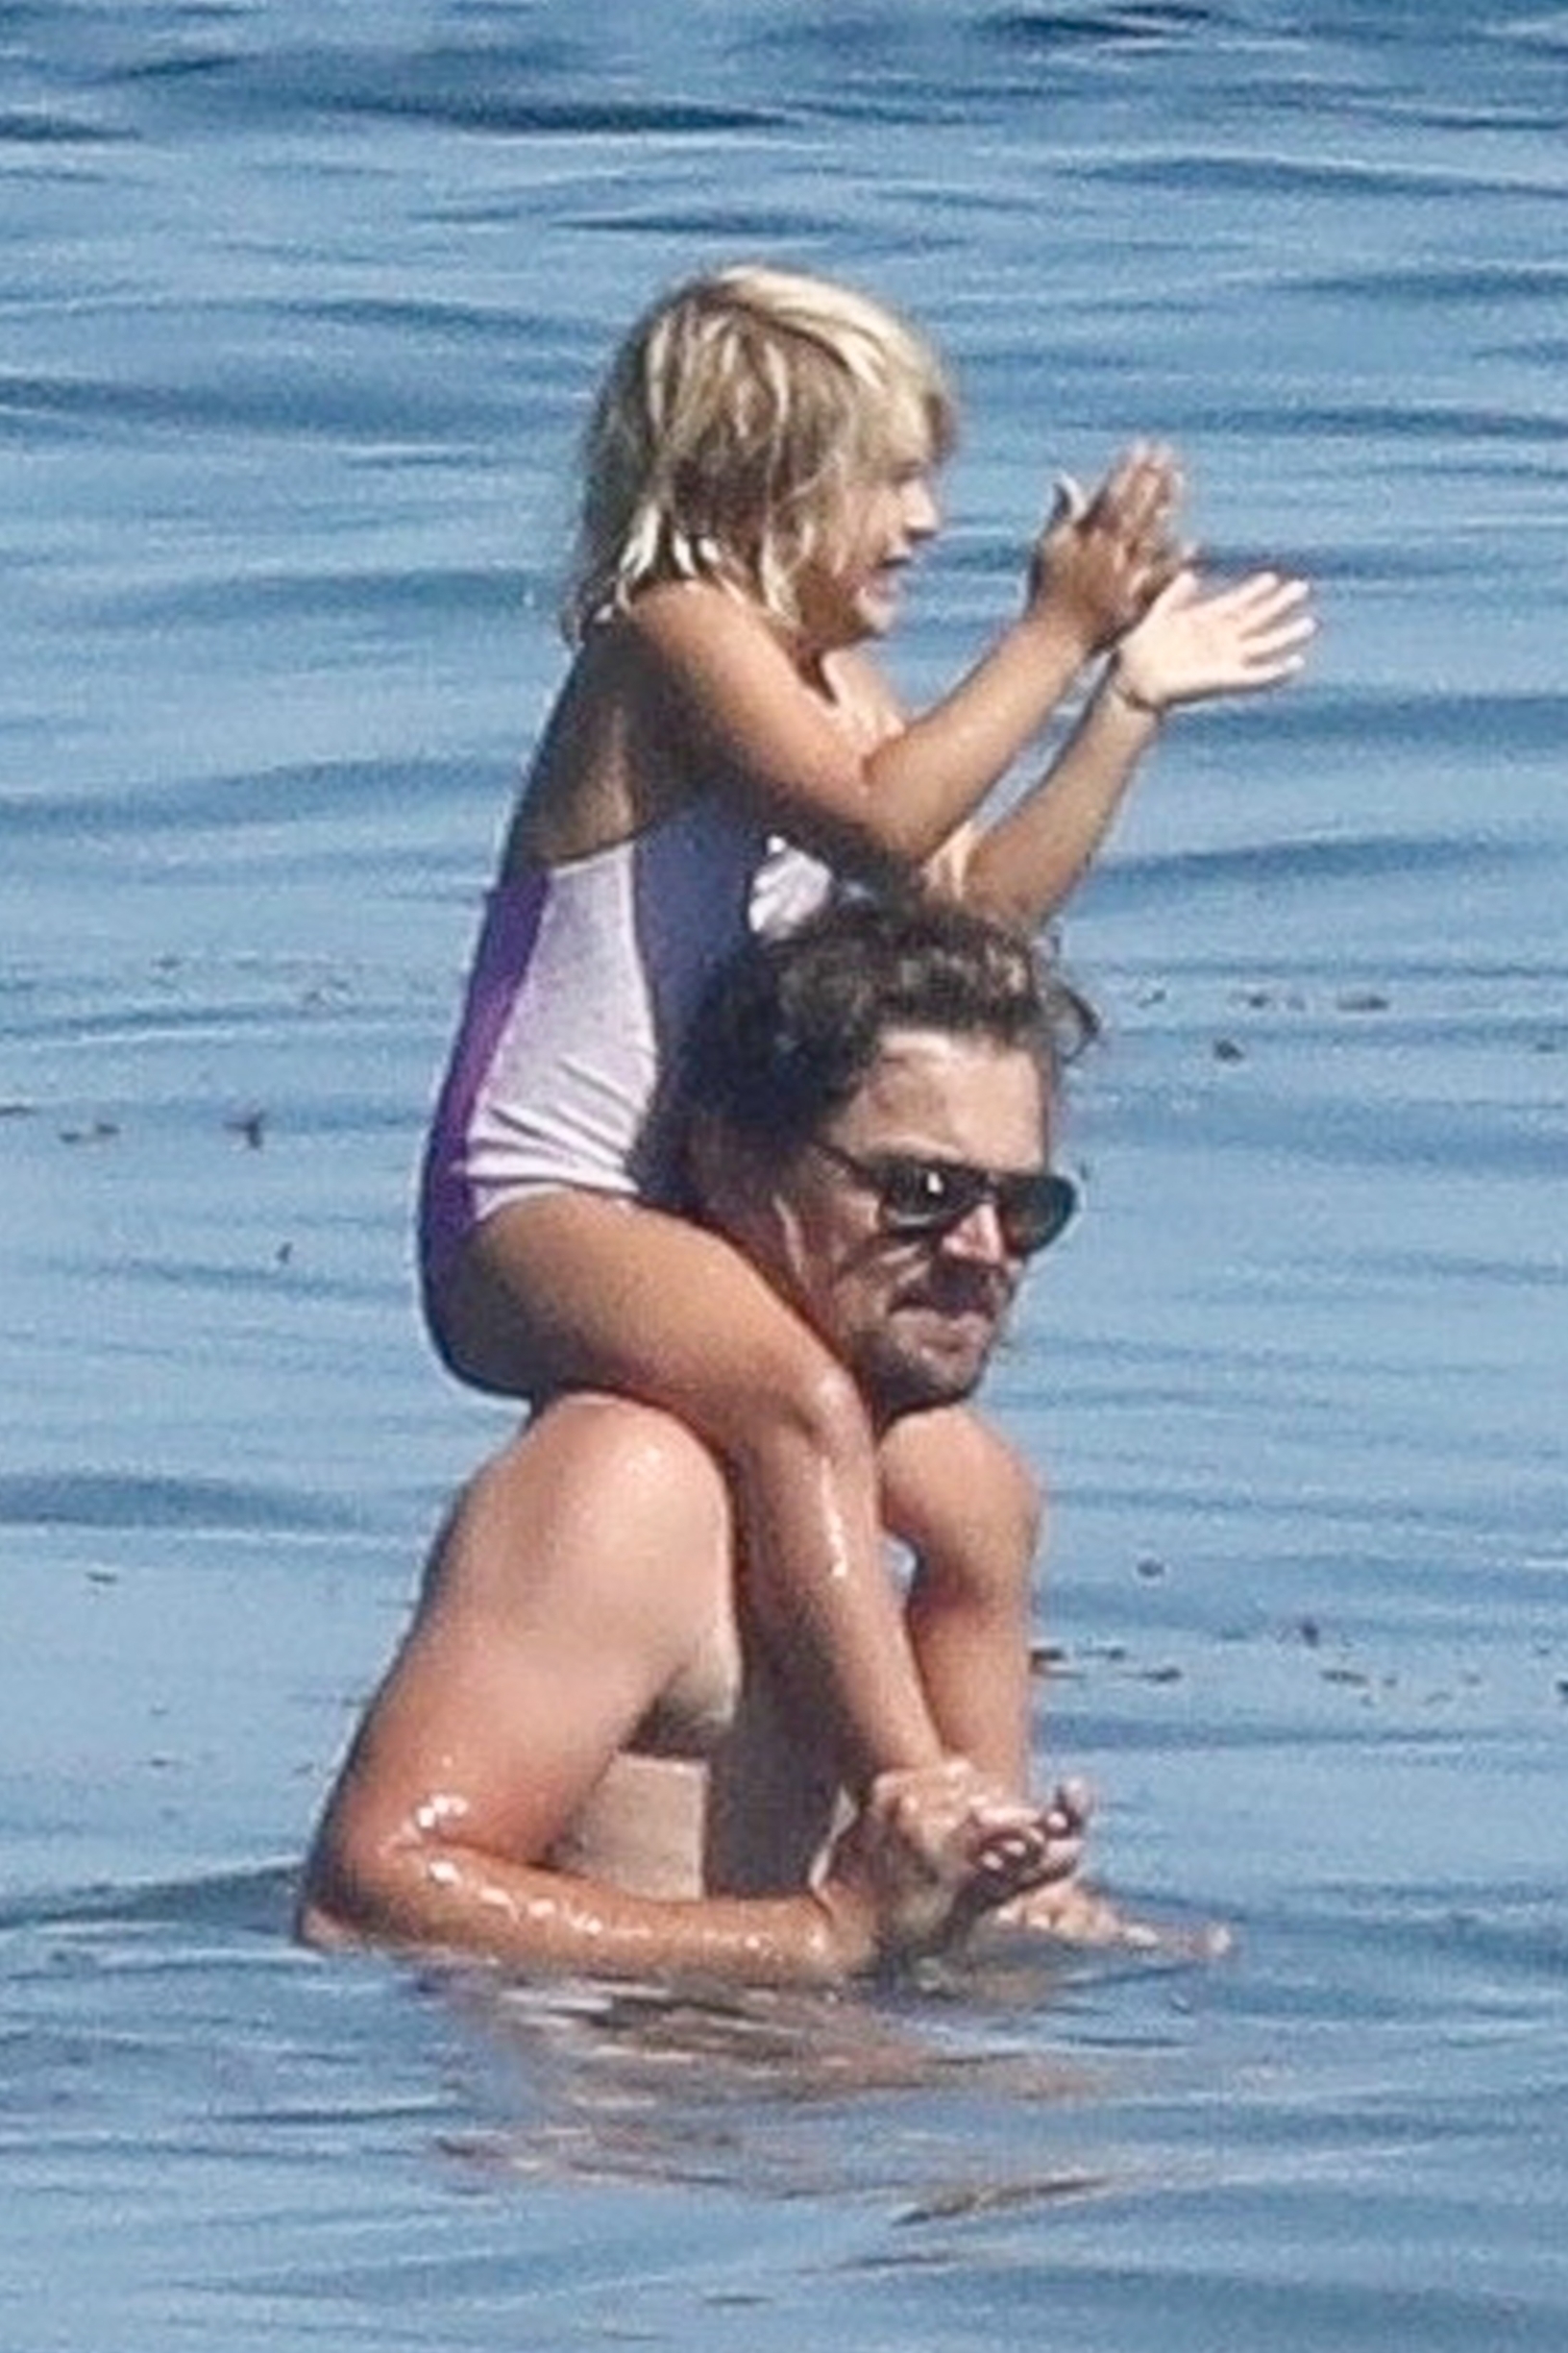 Malibu, CA  - *EXCLUSIVE*  - Leonardo DiCaprio cools off in the ocean while enjoying a fun summer day at the beach with his family in Malibu.

BACKGRID USA 14 AUGUST 2020,Image: 552613012, License: Rights-managed, Restrictions: , Model Release: no, Credit line: RMBI / BACKGRID / Backgrid USA / Profimedia